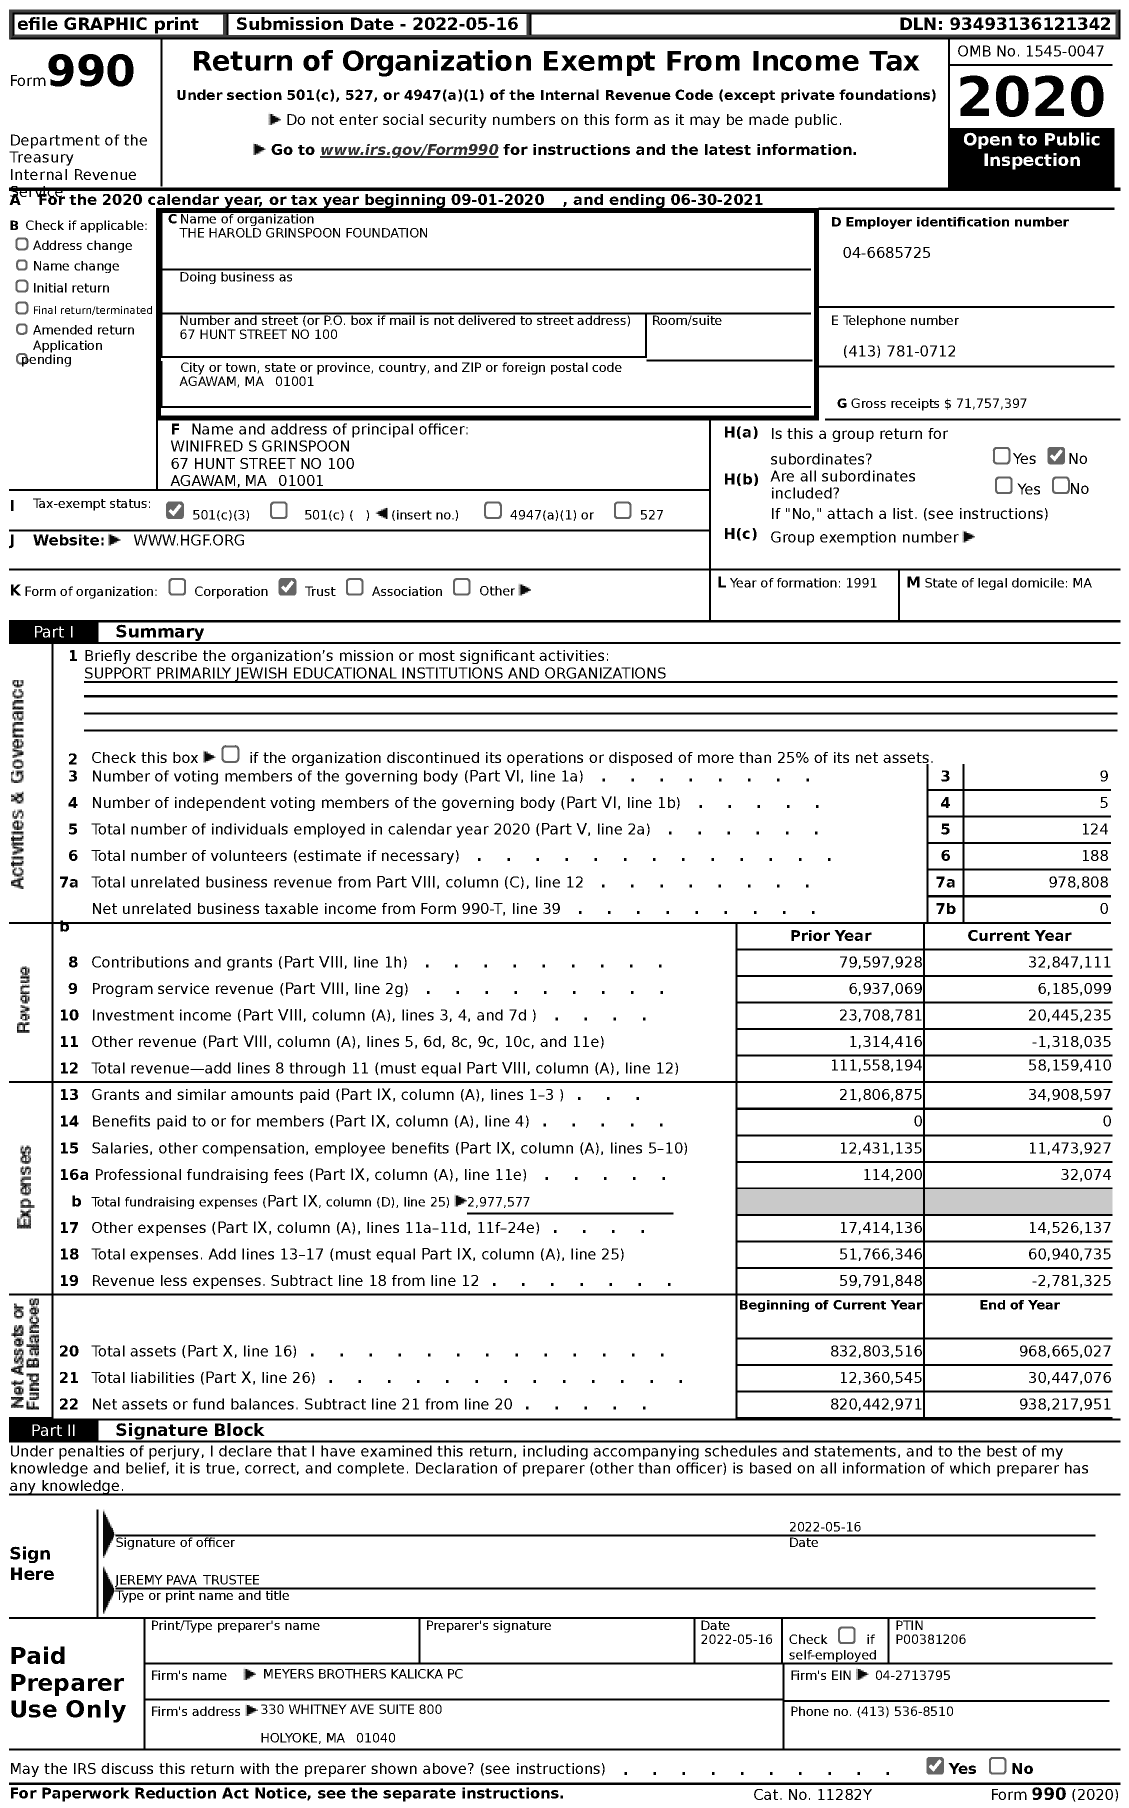 Image of first page of 2020 Form 990 for Harold Grinspoon Foundation (HGF)